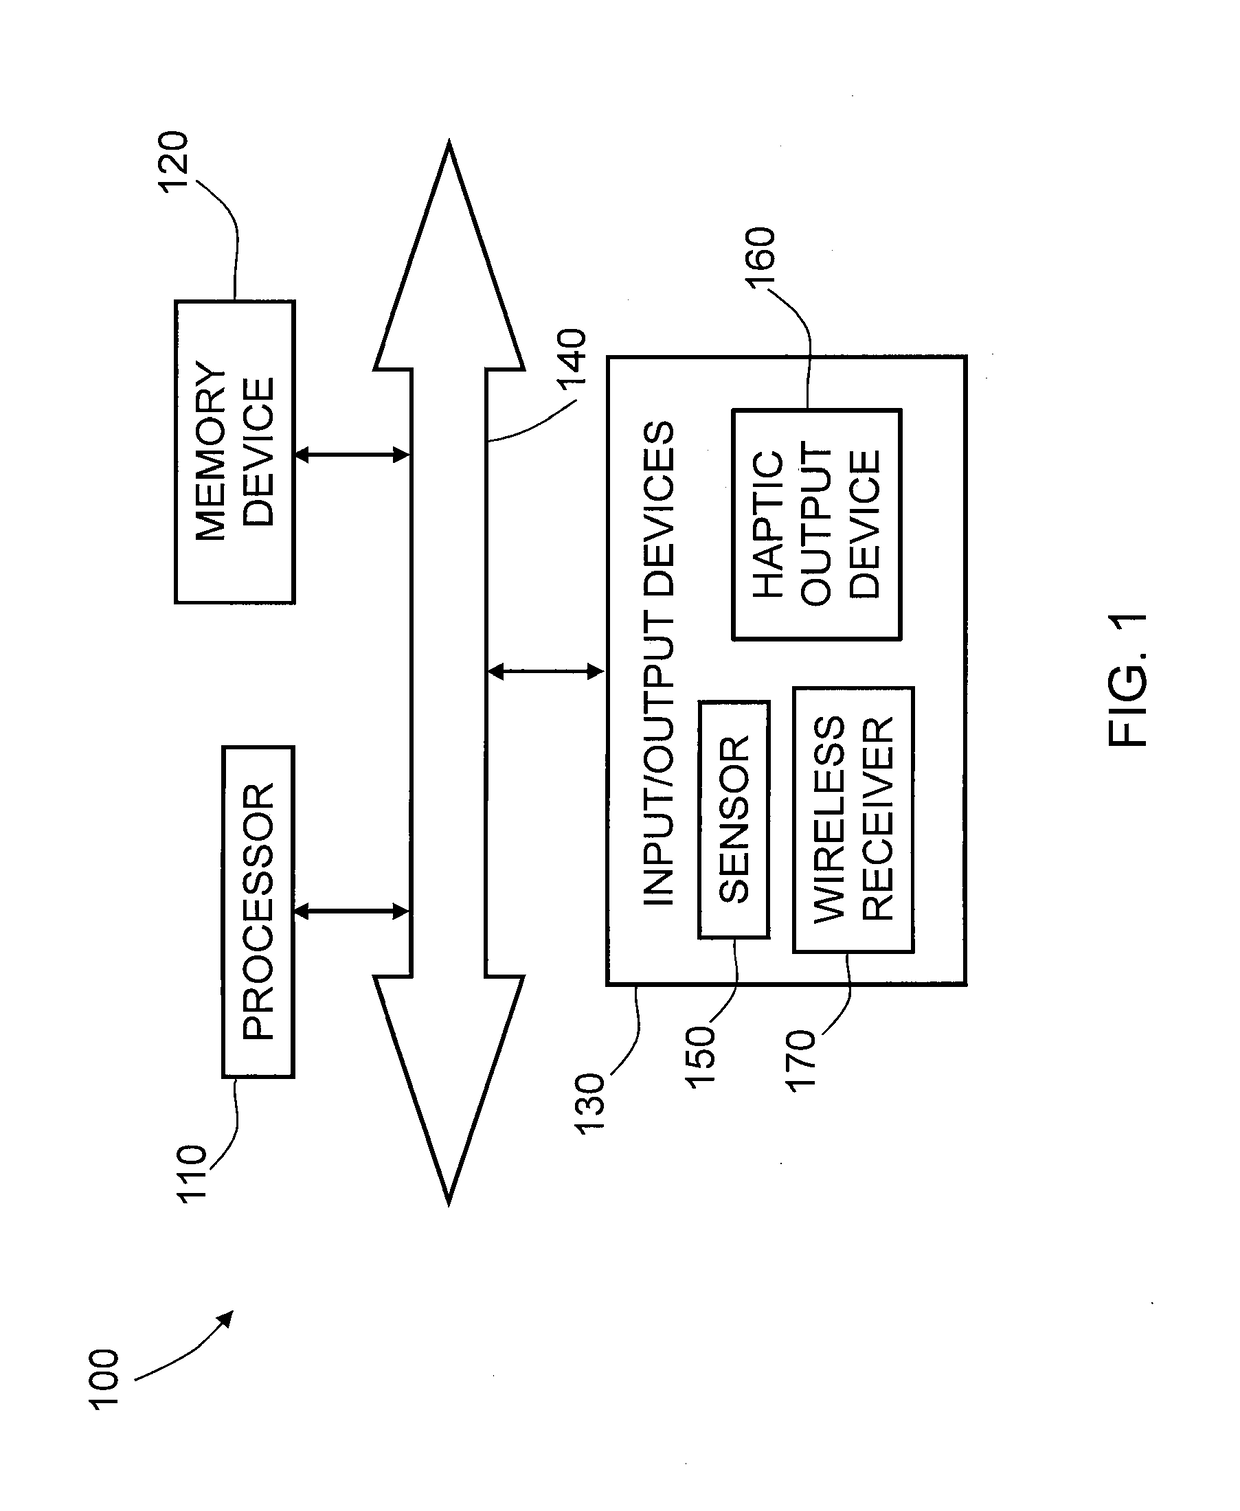 Systems and Methods for Awareness in Vehicles Using Haptic Effects